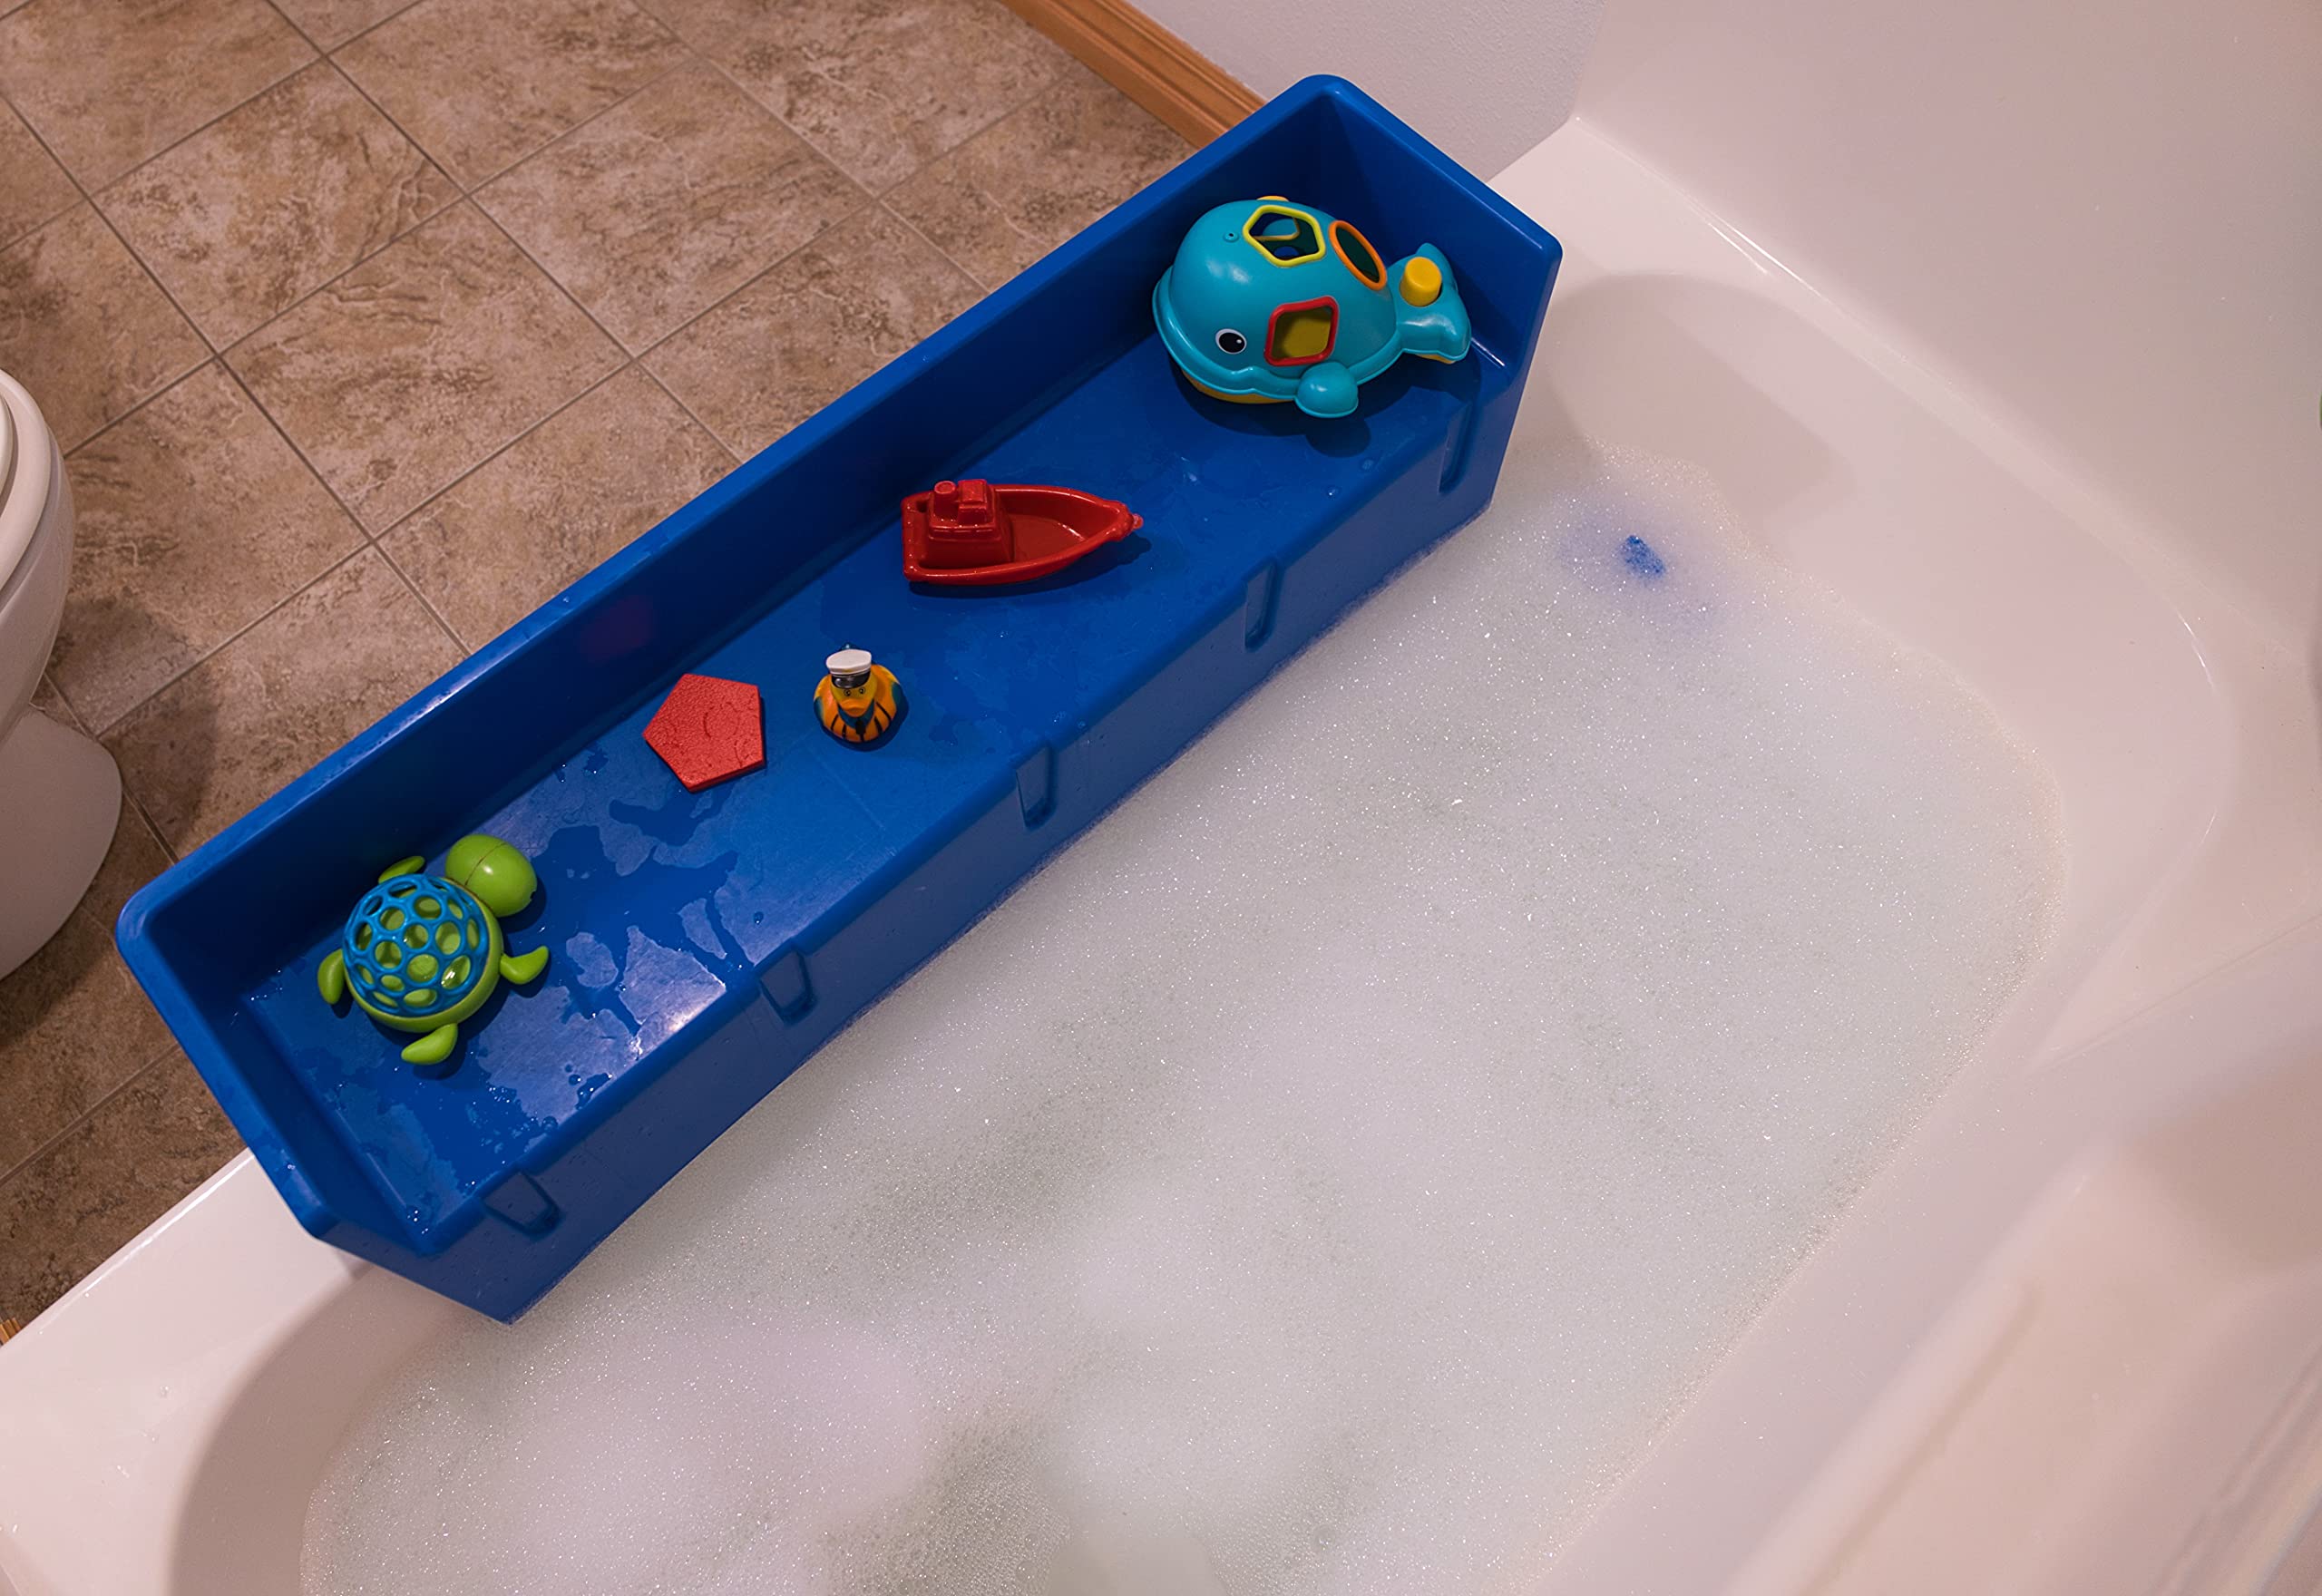 Tub Topper® Bathtub Splash Guard Play Shelf Area -Toy Tray Caddy Holder Storage -Suction Cups Attach to Bath Tub -No Mess Water Spill in Bathroom -Fun for Toddlers Kids Baby